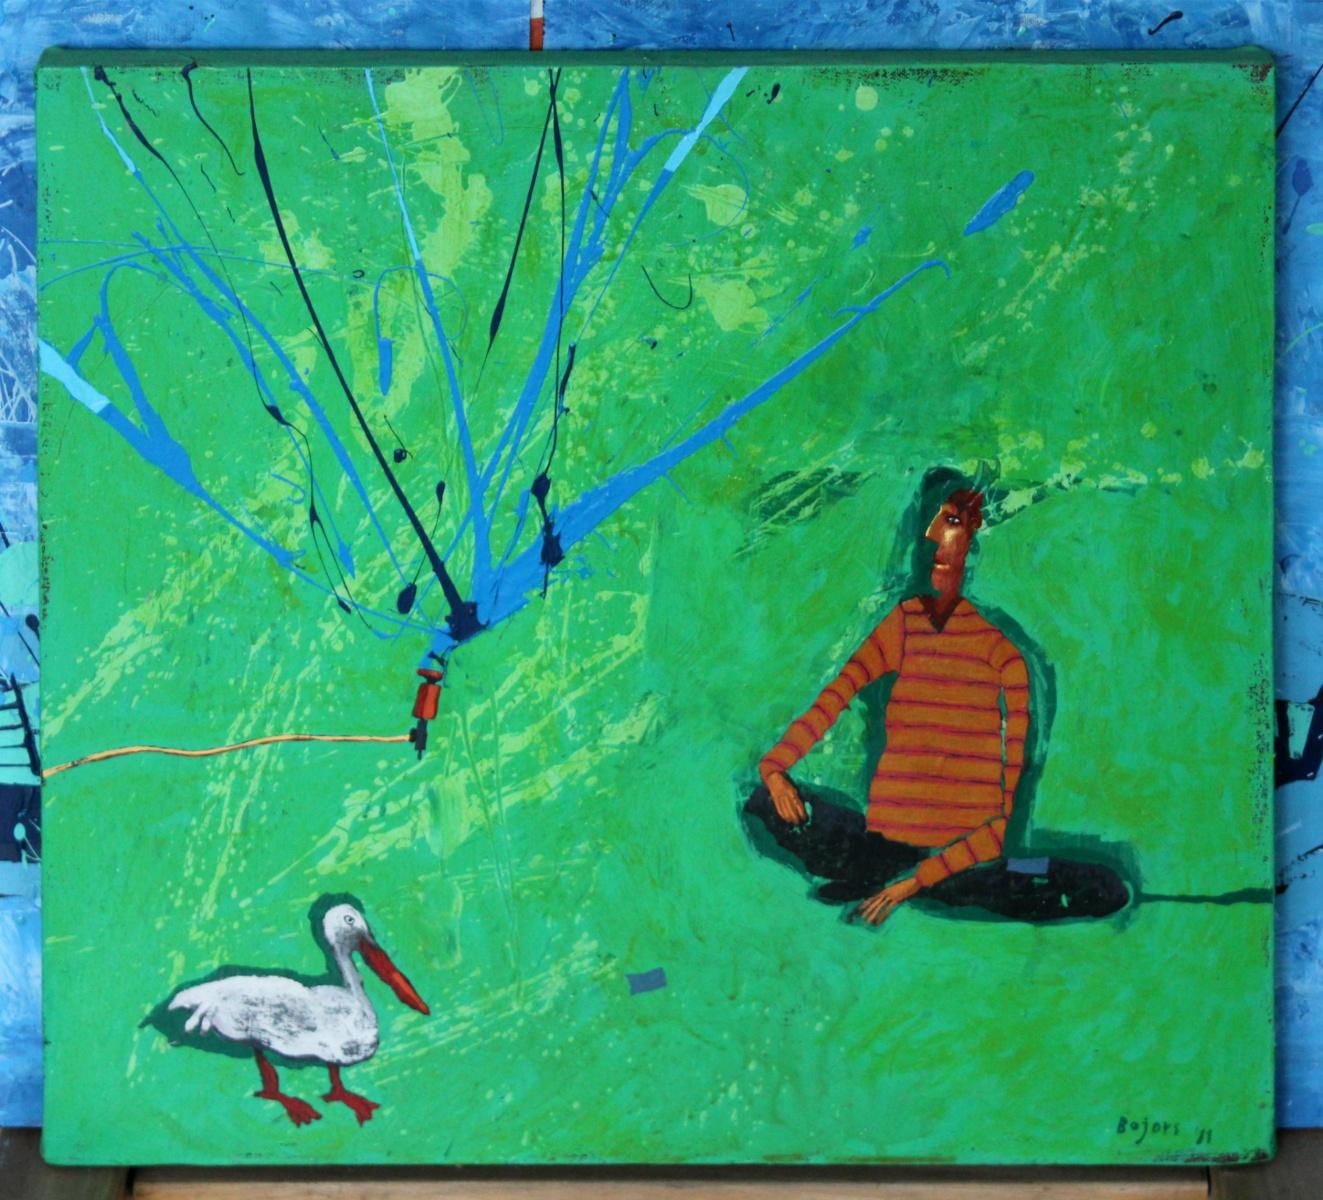 Encounter with a bird - Acrylic figurative painting, Landscape, Vibrant Green - Painting by Rafał Bojdys